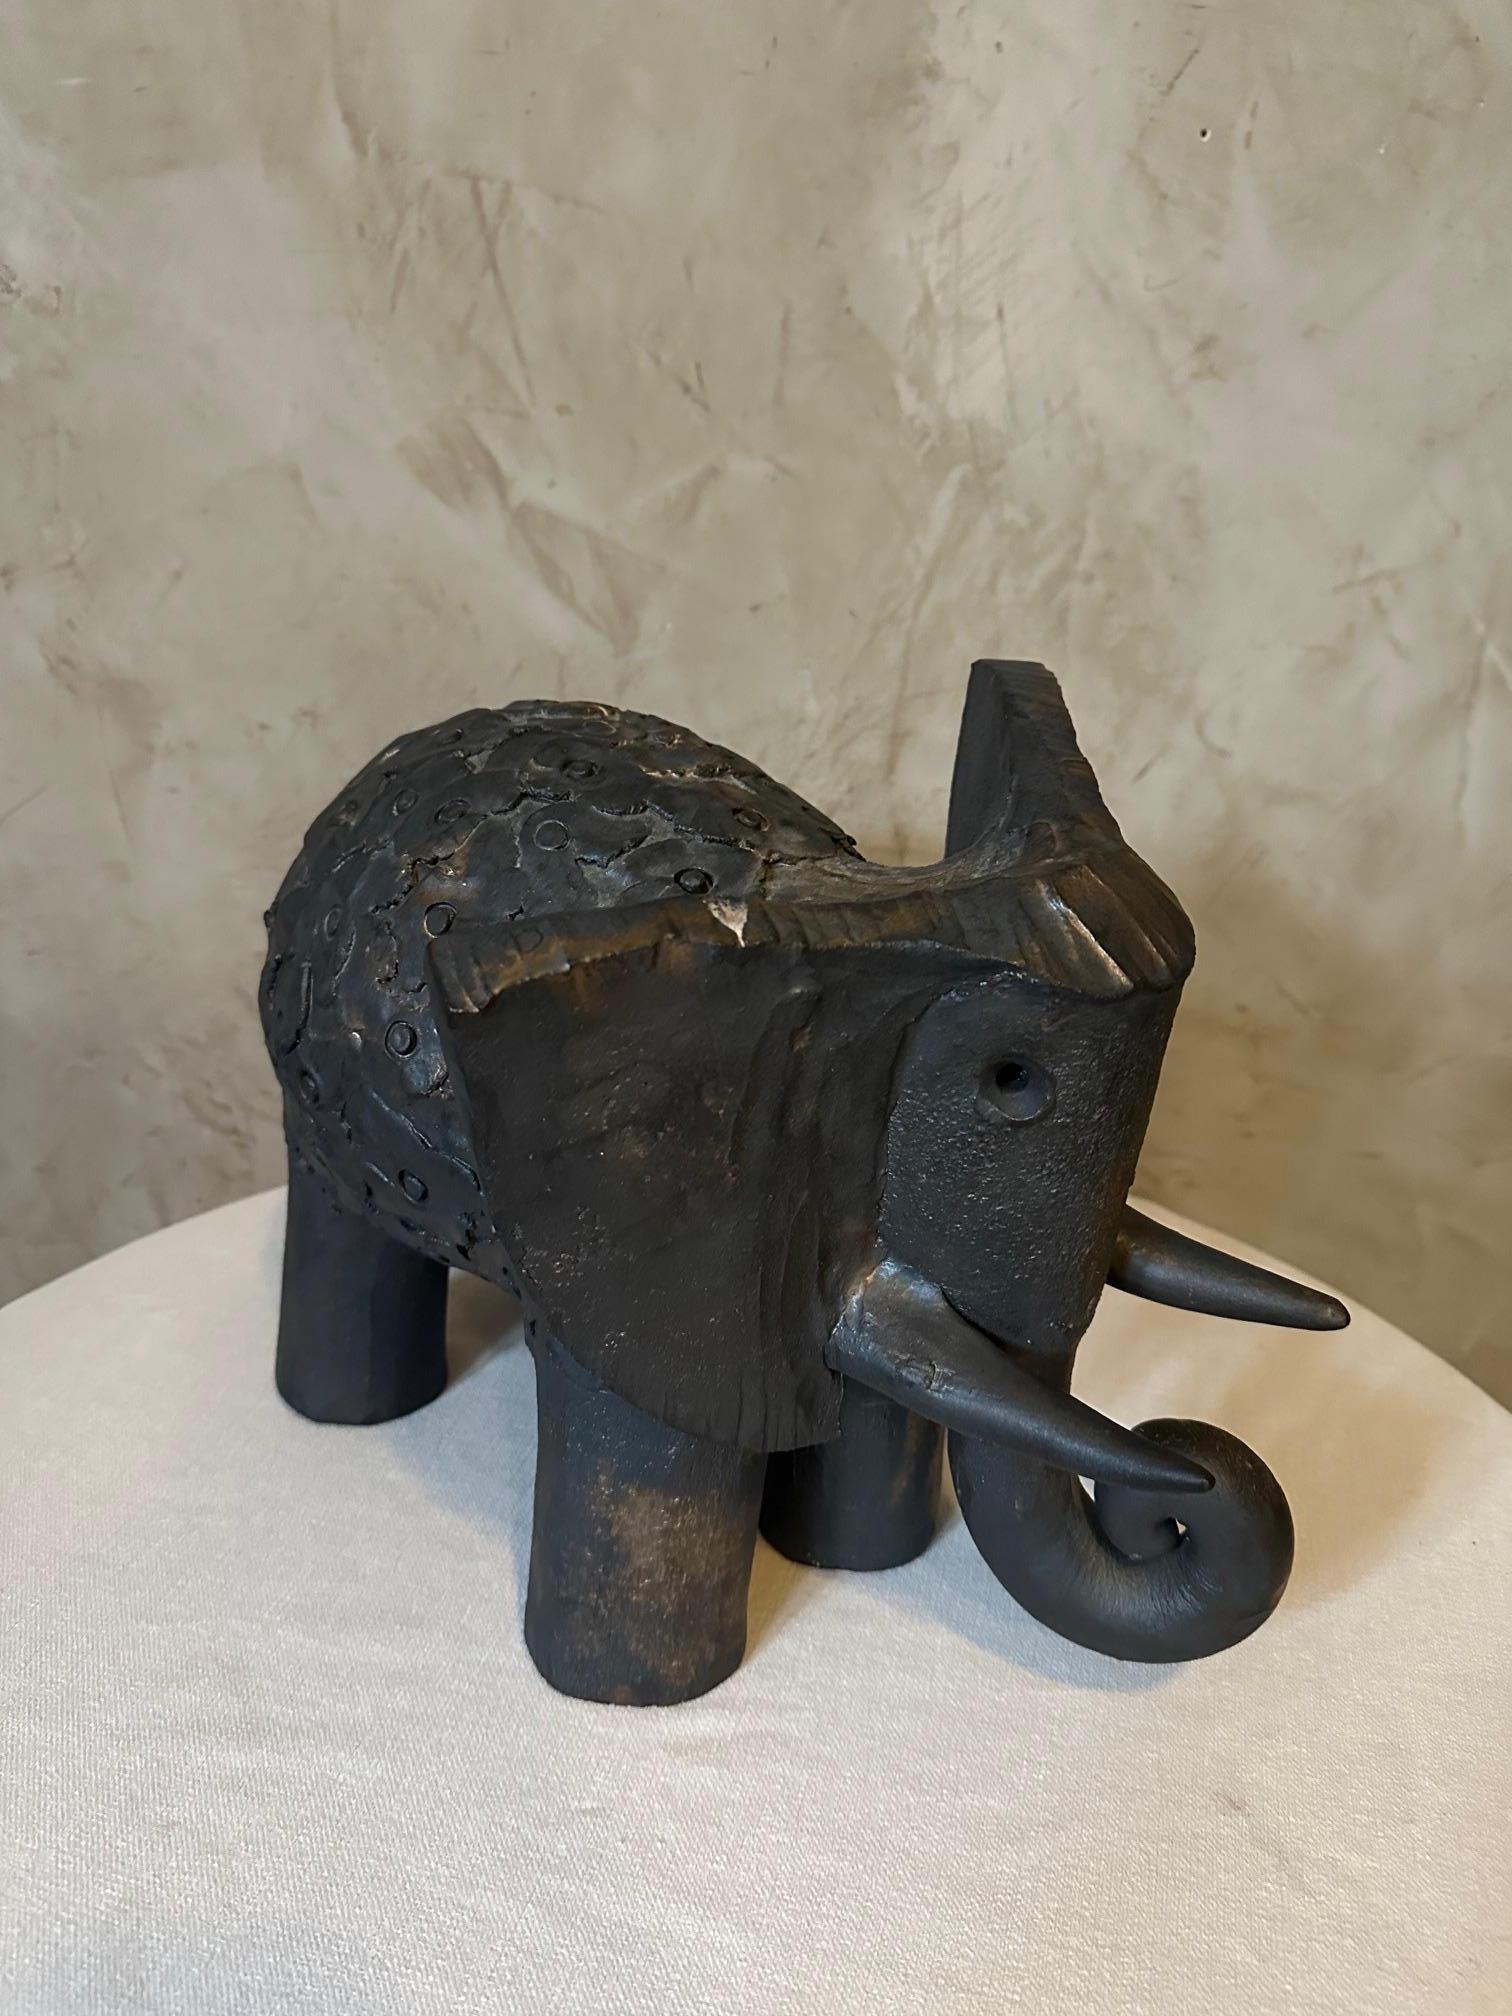 Rare and unique piece dating from the 2000s!! Ceramic elephant signed by Dominique Pouchain. Very good state.
Incredible ceramic work. The baby elephant's back is carved with a flower motif. Very beautiful brown patina with copper highlights, bronze